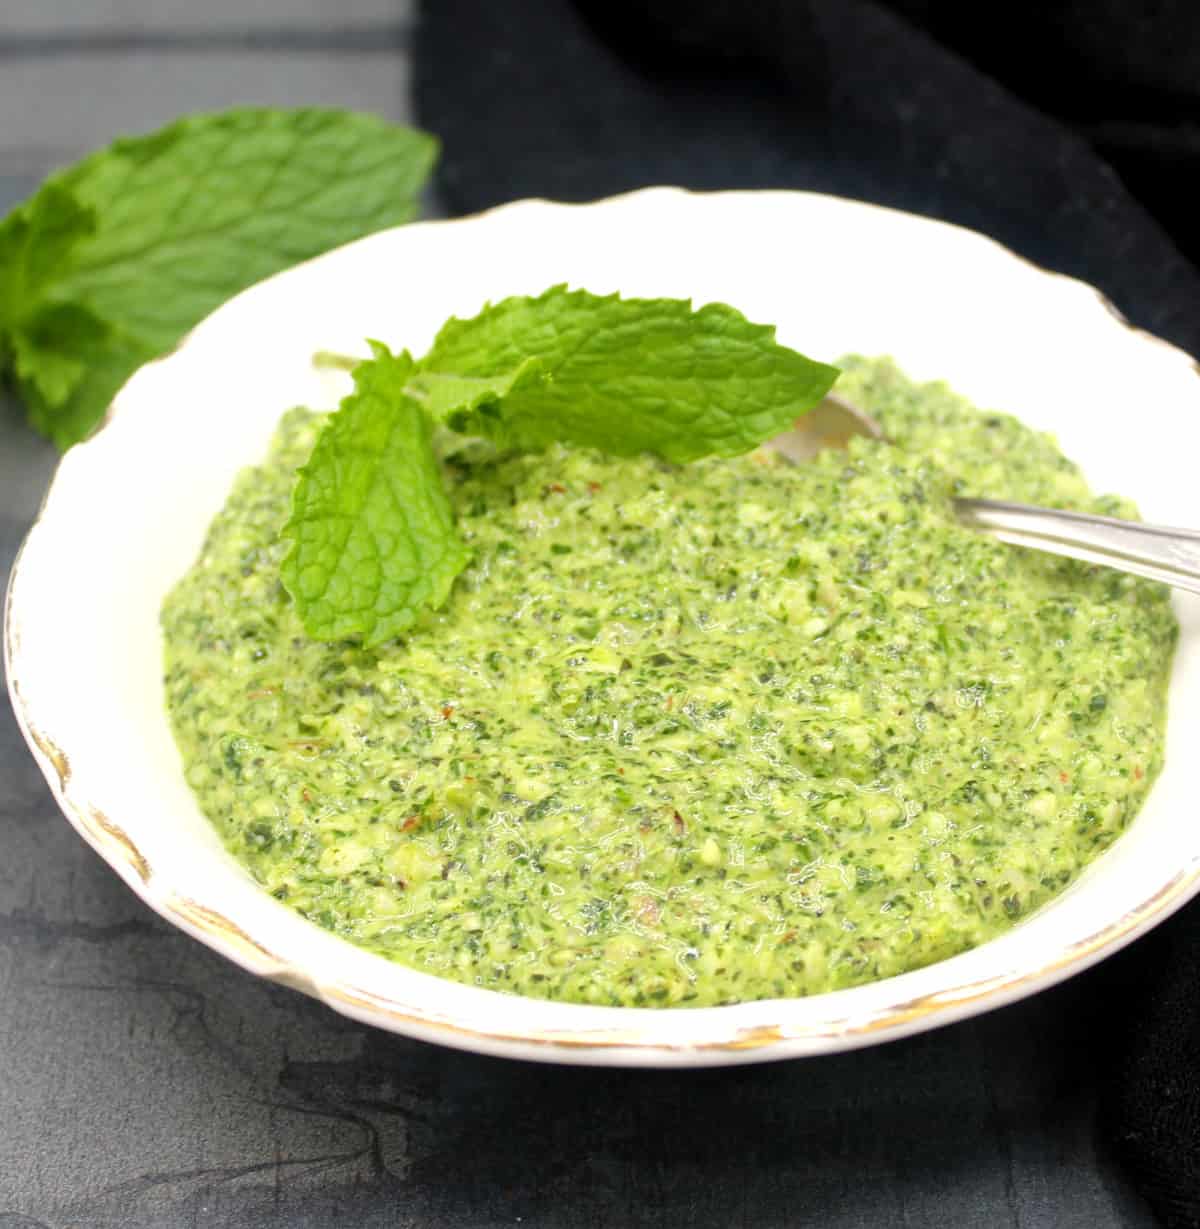 Vegan mint pesto in white bowl with a sprig of mint and spoon.